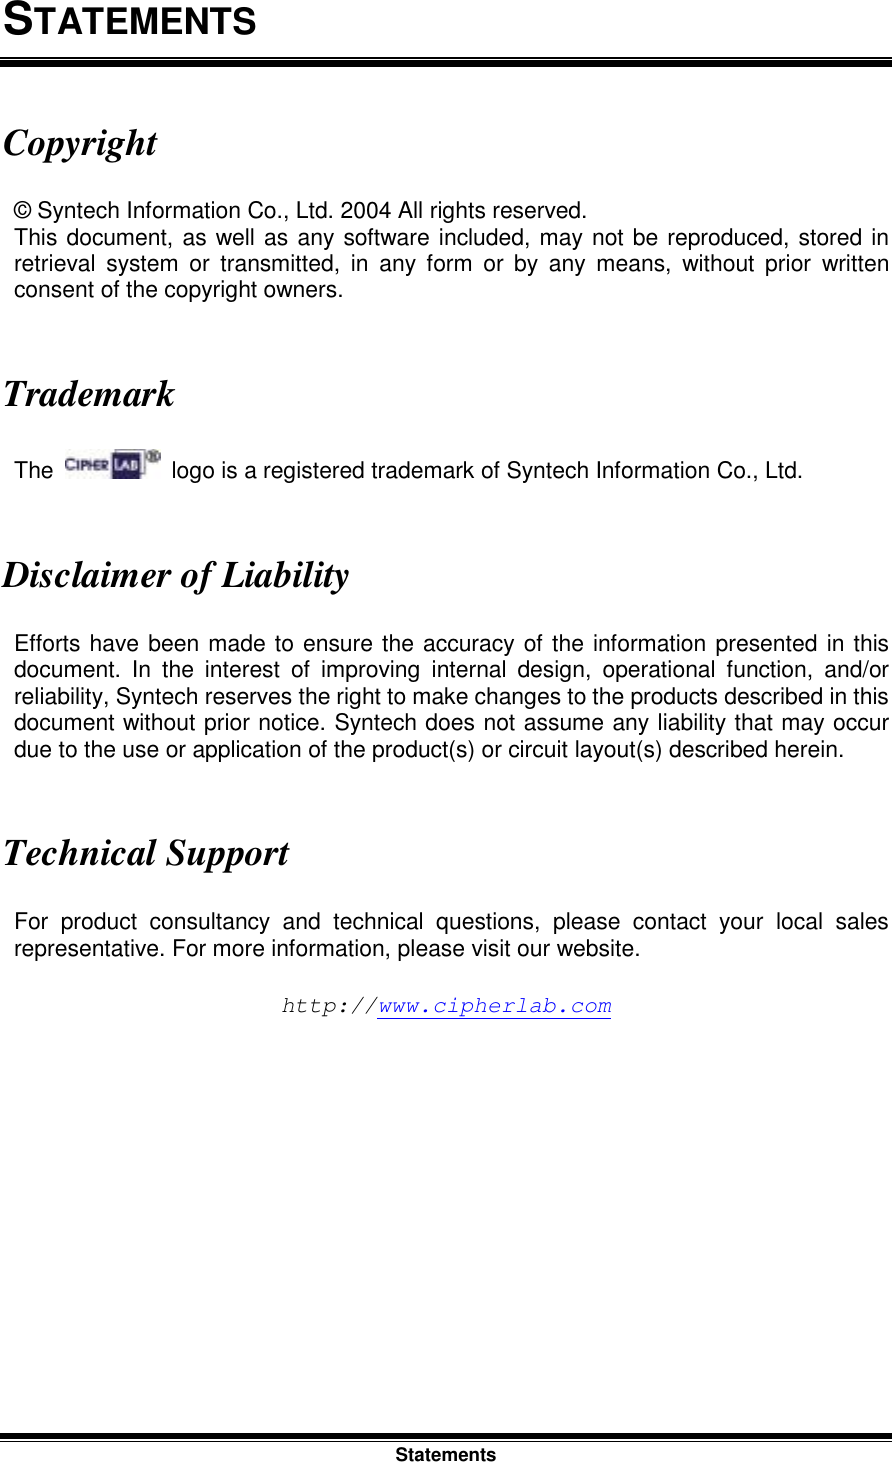 Statements STATEMENTS Copyright © Syntech Information Co., Ltd. 2004 All rights reserved. This document, as well as any software included, may not be reproduced, stored in retrieval system or transmitted, in any form or by any means, without prior written consent of the copyright owners.   Trademark The    logo is a registered trademark of Syntech Information Co., Ltd.   Disclaimer of Liability Efforts have been made to ensure the accuracy of the information presented in this document. In the interest of improving internal design, operational function, and/or reliability, Syntech reserves the right to make changes to the products described in this document without prior notice. Syntech does not assume any liability that may occur due to the use or application of the product(s) or circuit layout(s) described herein.   Technical Support For product consultancy and technical questions, please contact your local sales representative. For more information, please visit our website.  http://www.cipherlab.com 